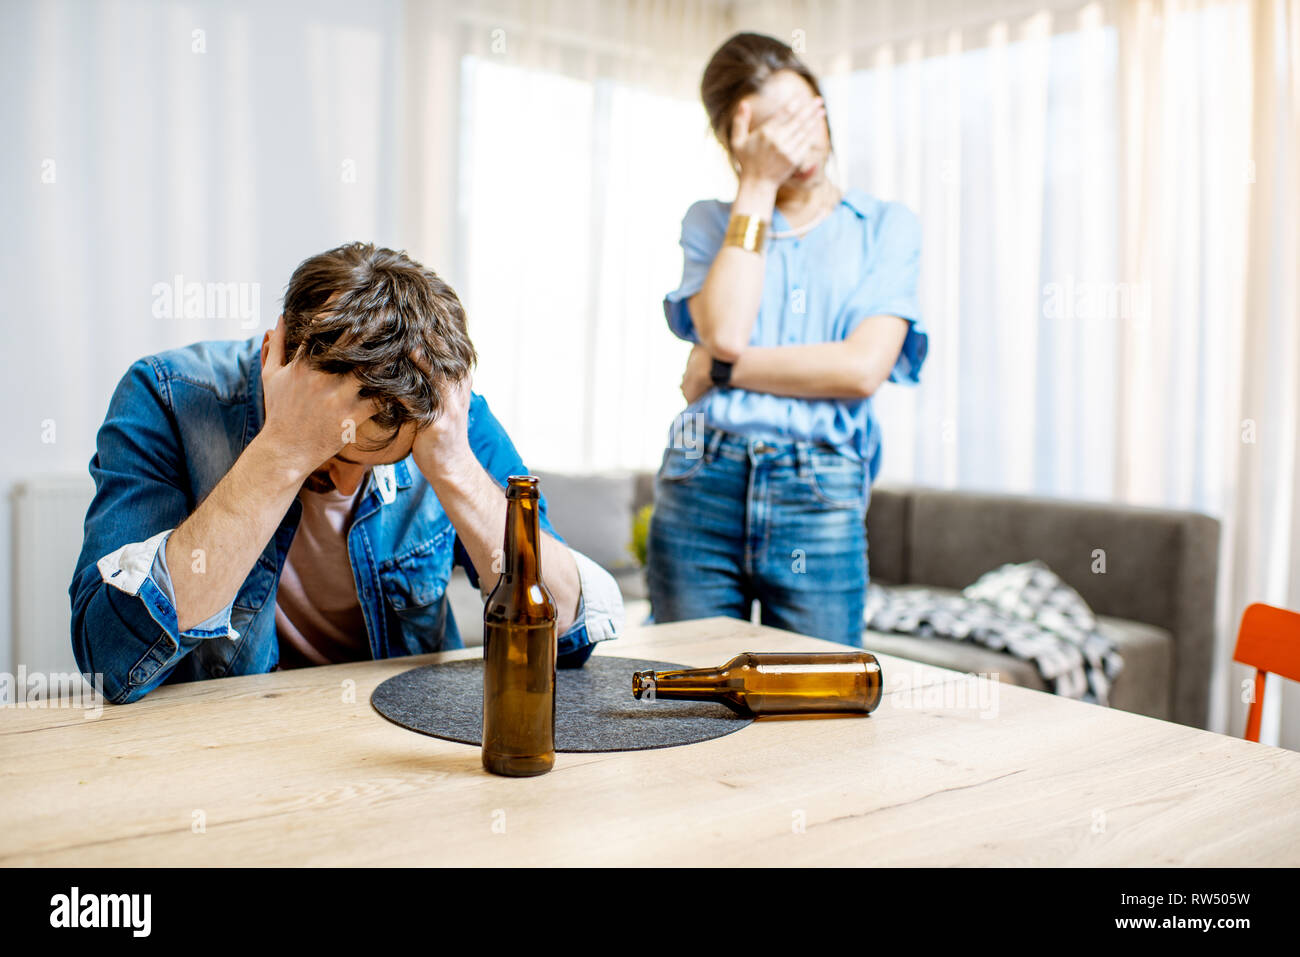 Drunk man suffering from alcoholism feeling depressed sitting at home with young woman in despair on the background Stock Photo